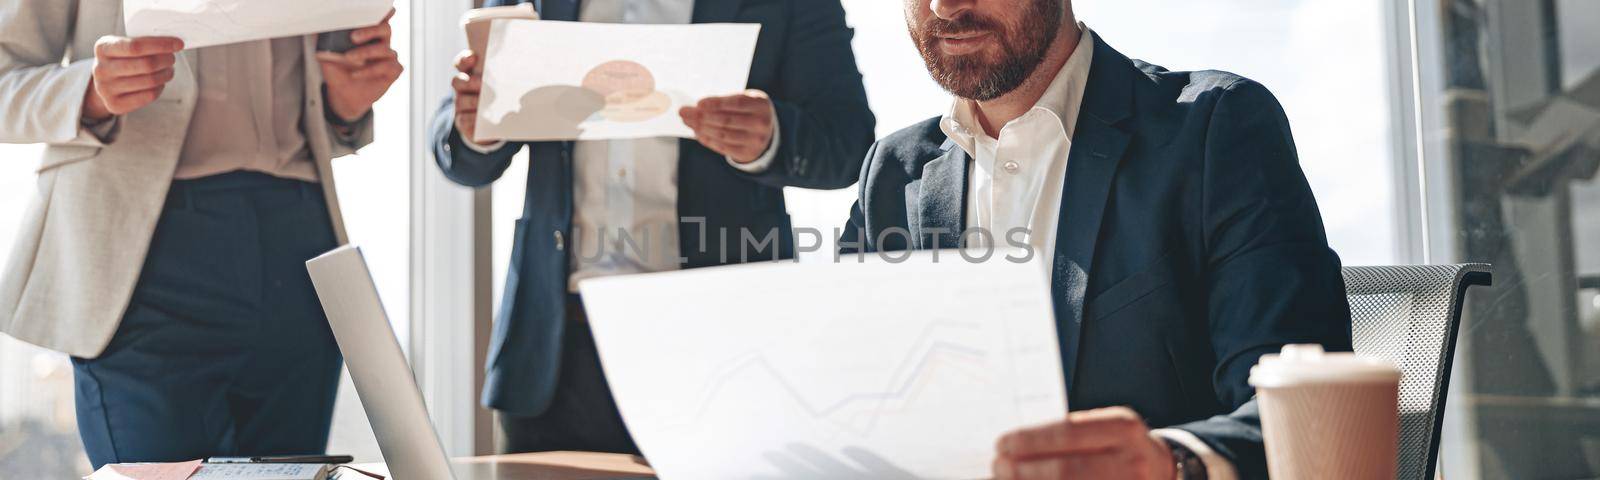 Focused businessmen discussing documents with graphs and charts in a modern office by Yaroslav_astakhov